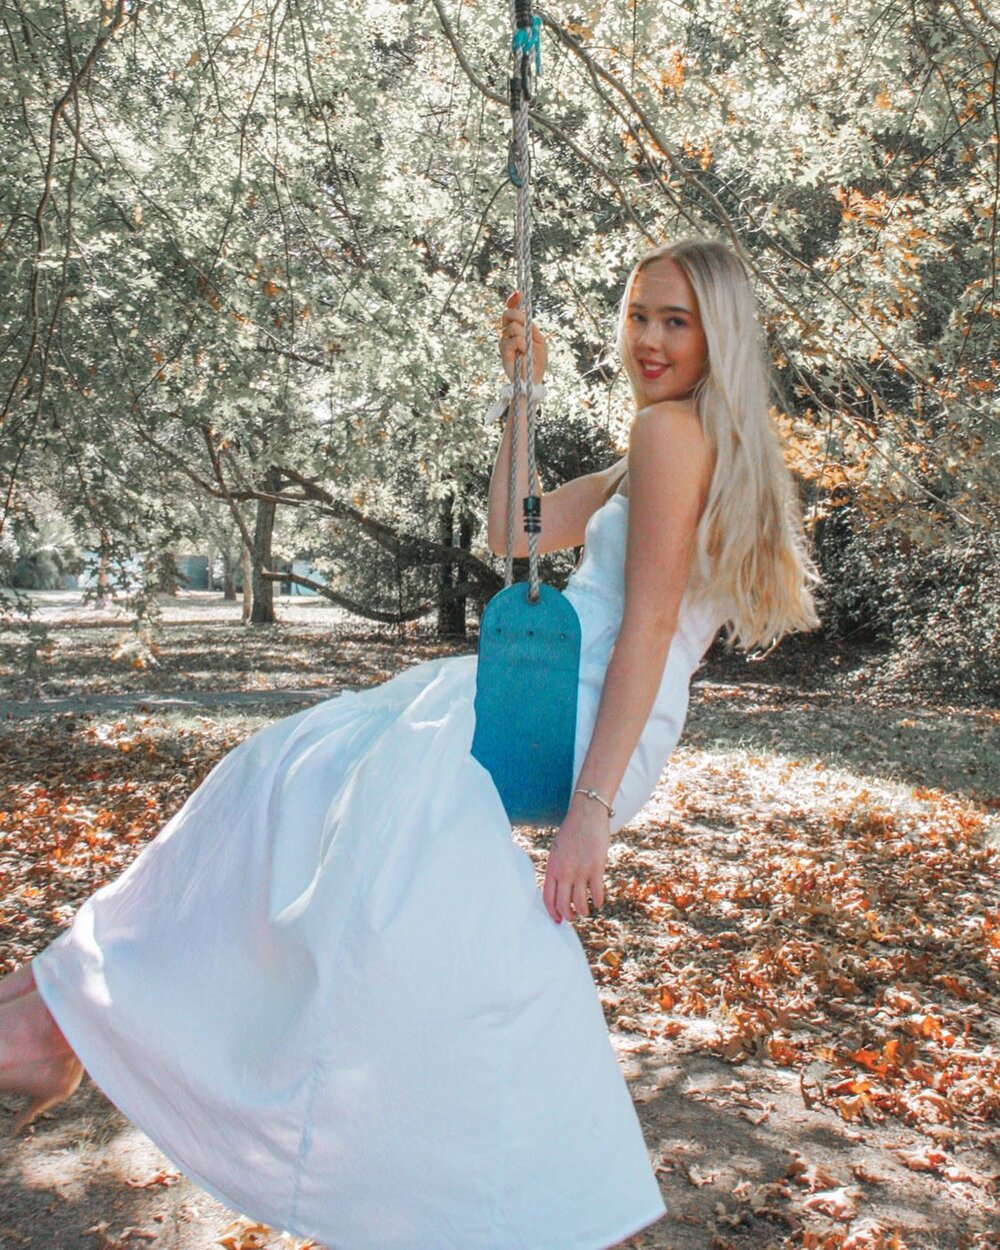 Fairytale dreams 🥰🤍

Sometimes putting on a beautiful dress, dancing in the garden and having a swing is all you need!

How is your week going? ☺️